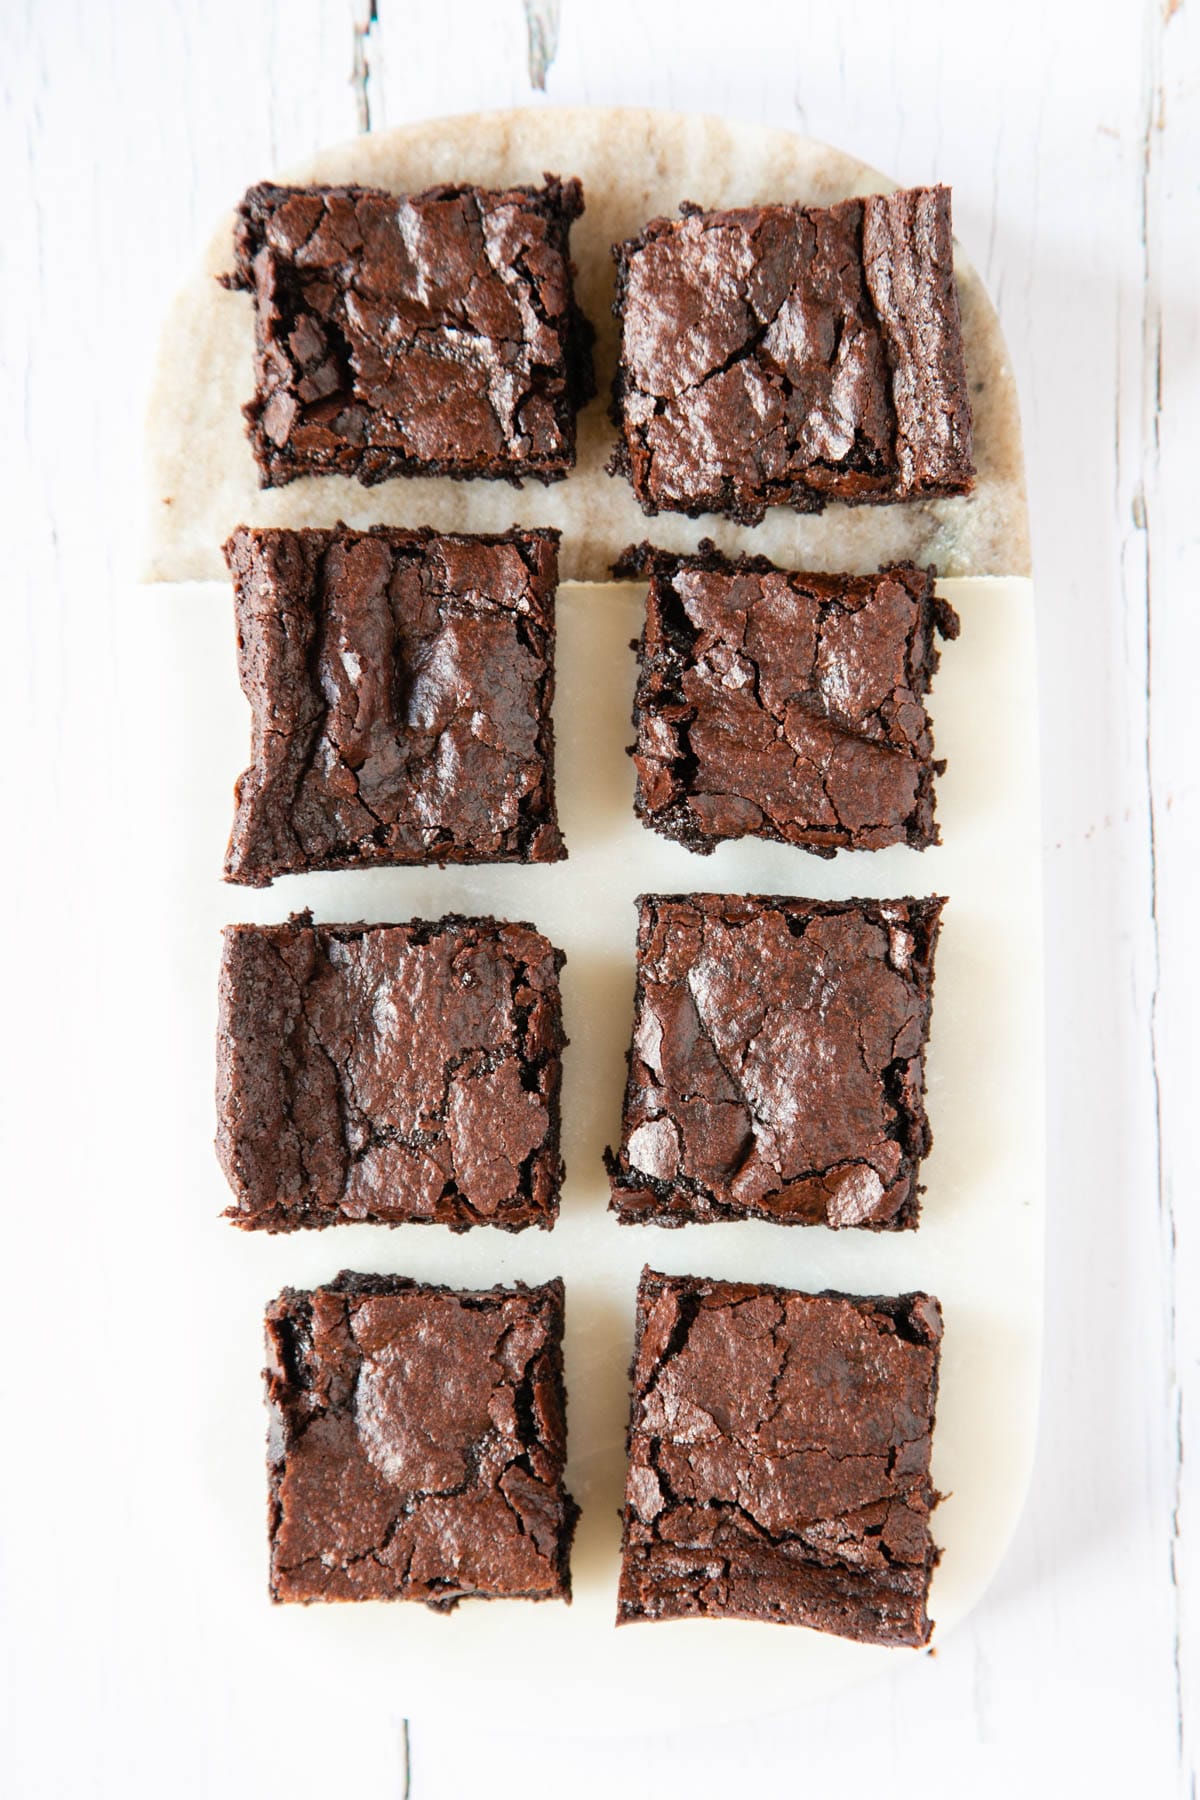 Despite their delicious gooey centre, the white marble board on which these cocoa brownies sit remains clean and unsmeared, which is why brownies make perfect finger food!